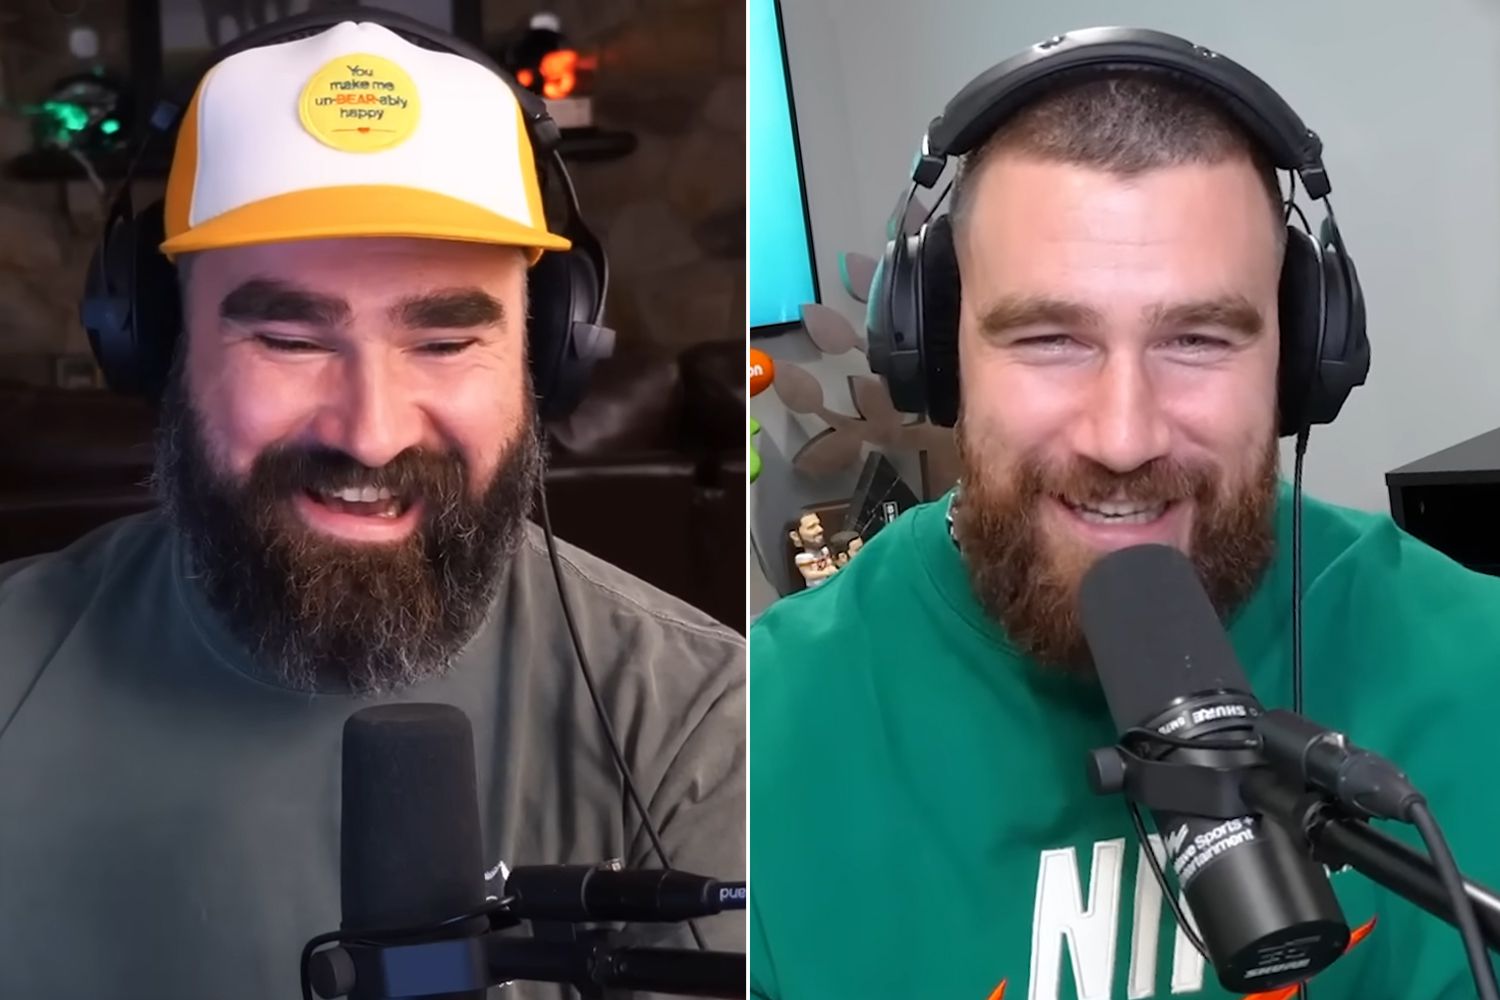 Philadelphia Eagles star Jason Kelce was caught off Guard when Taylor Swift Received Special Treatment over his wife Kylie at a recent event. Check out Travis’ Reaction!